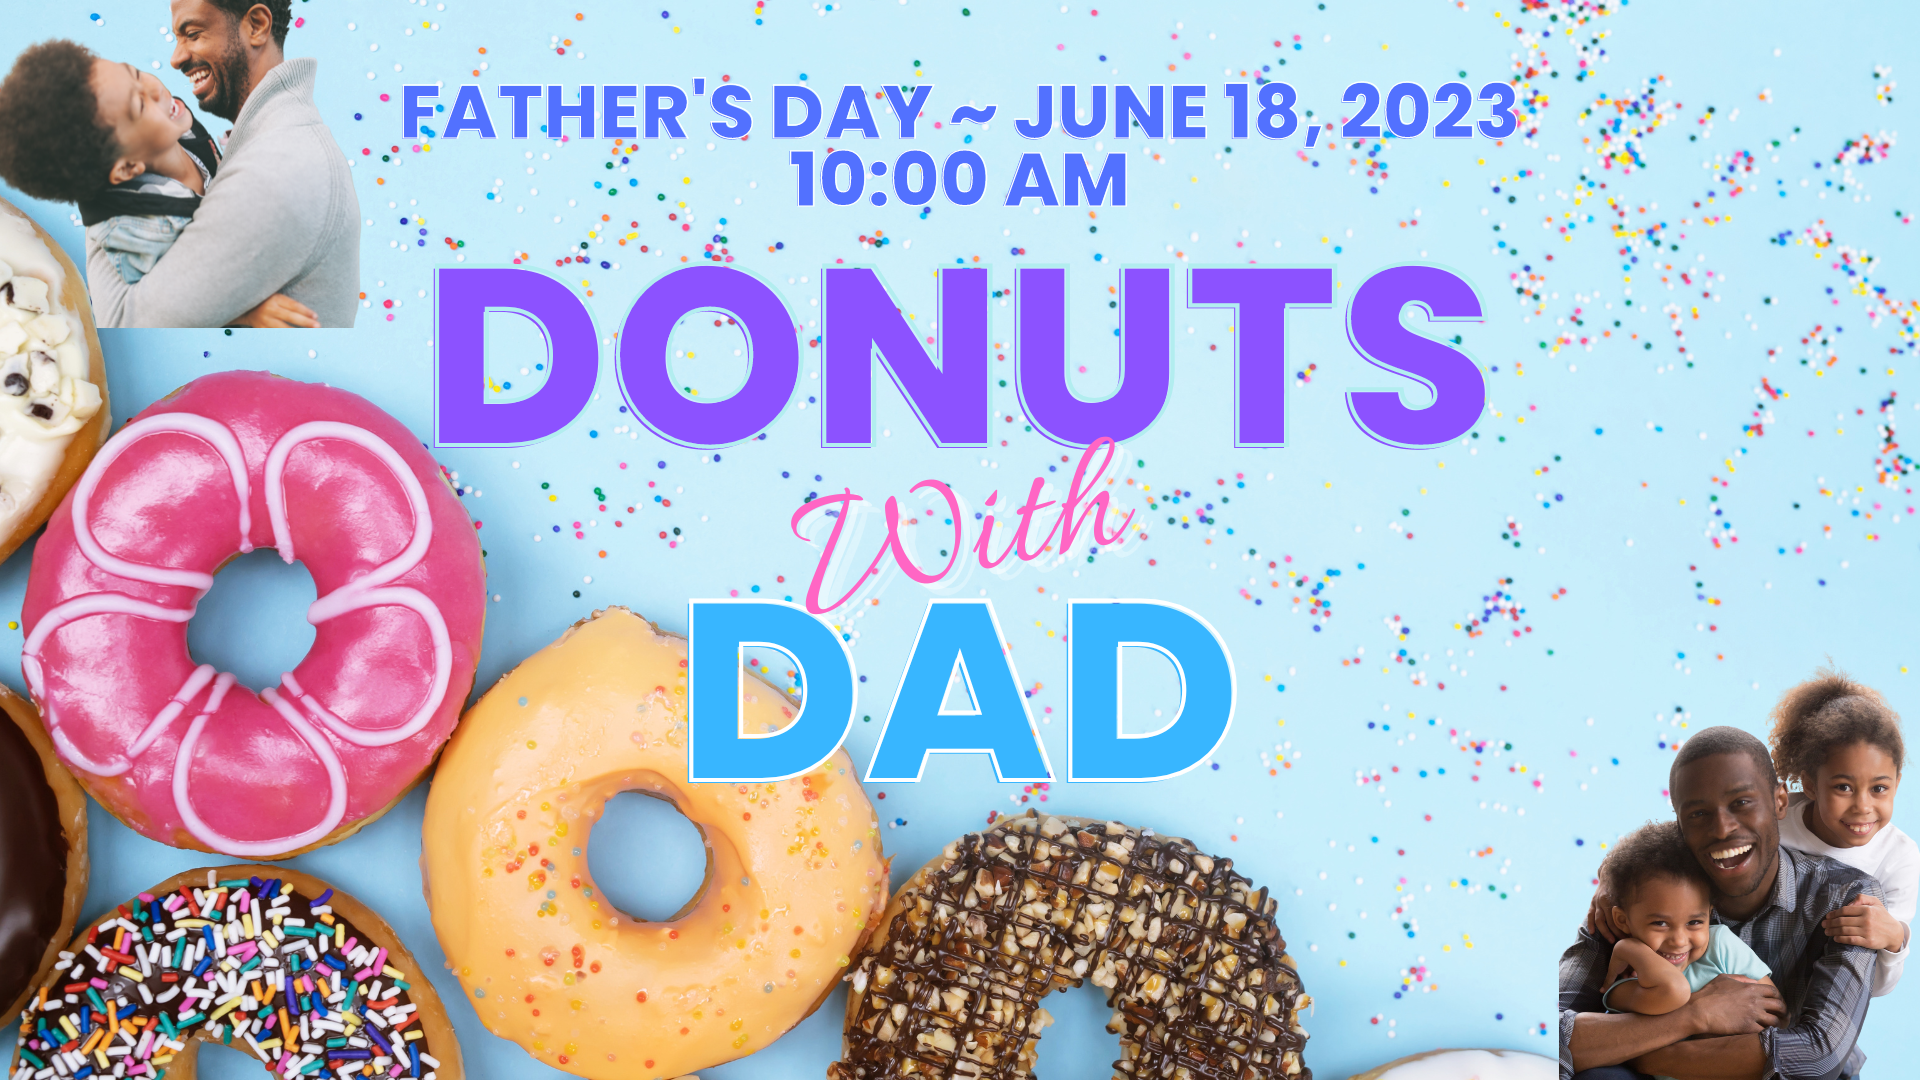 Donuts With Dad head image